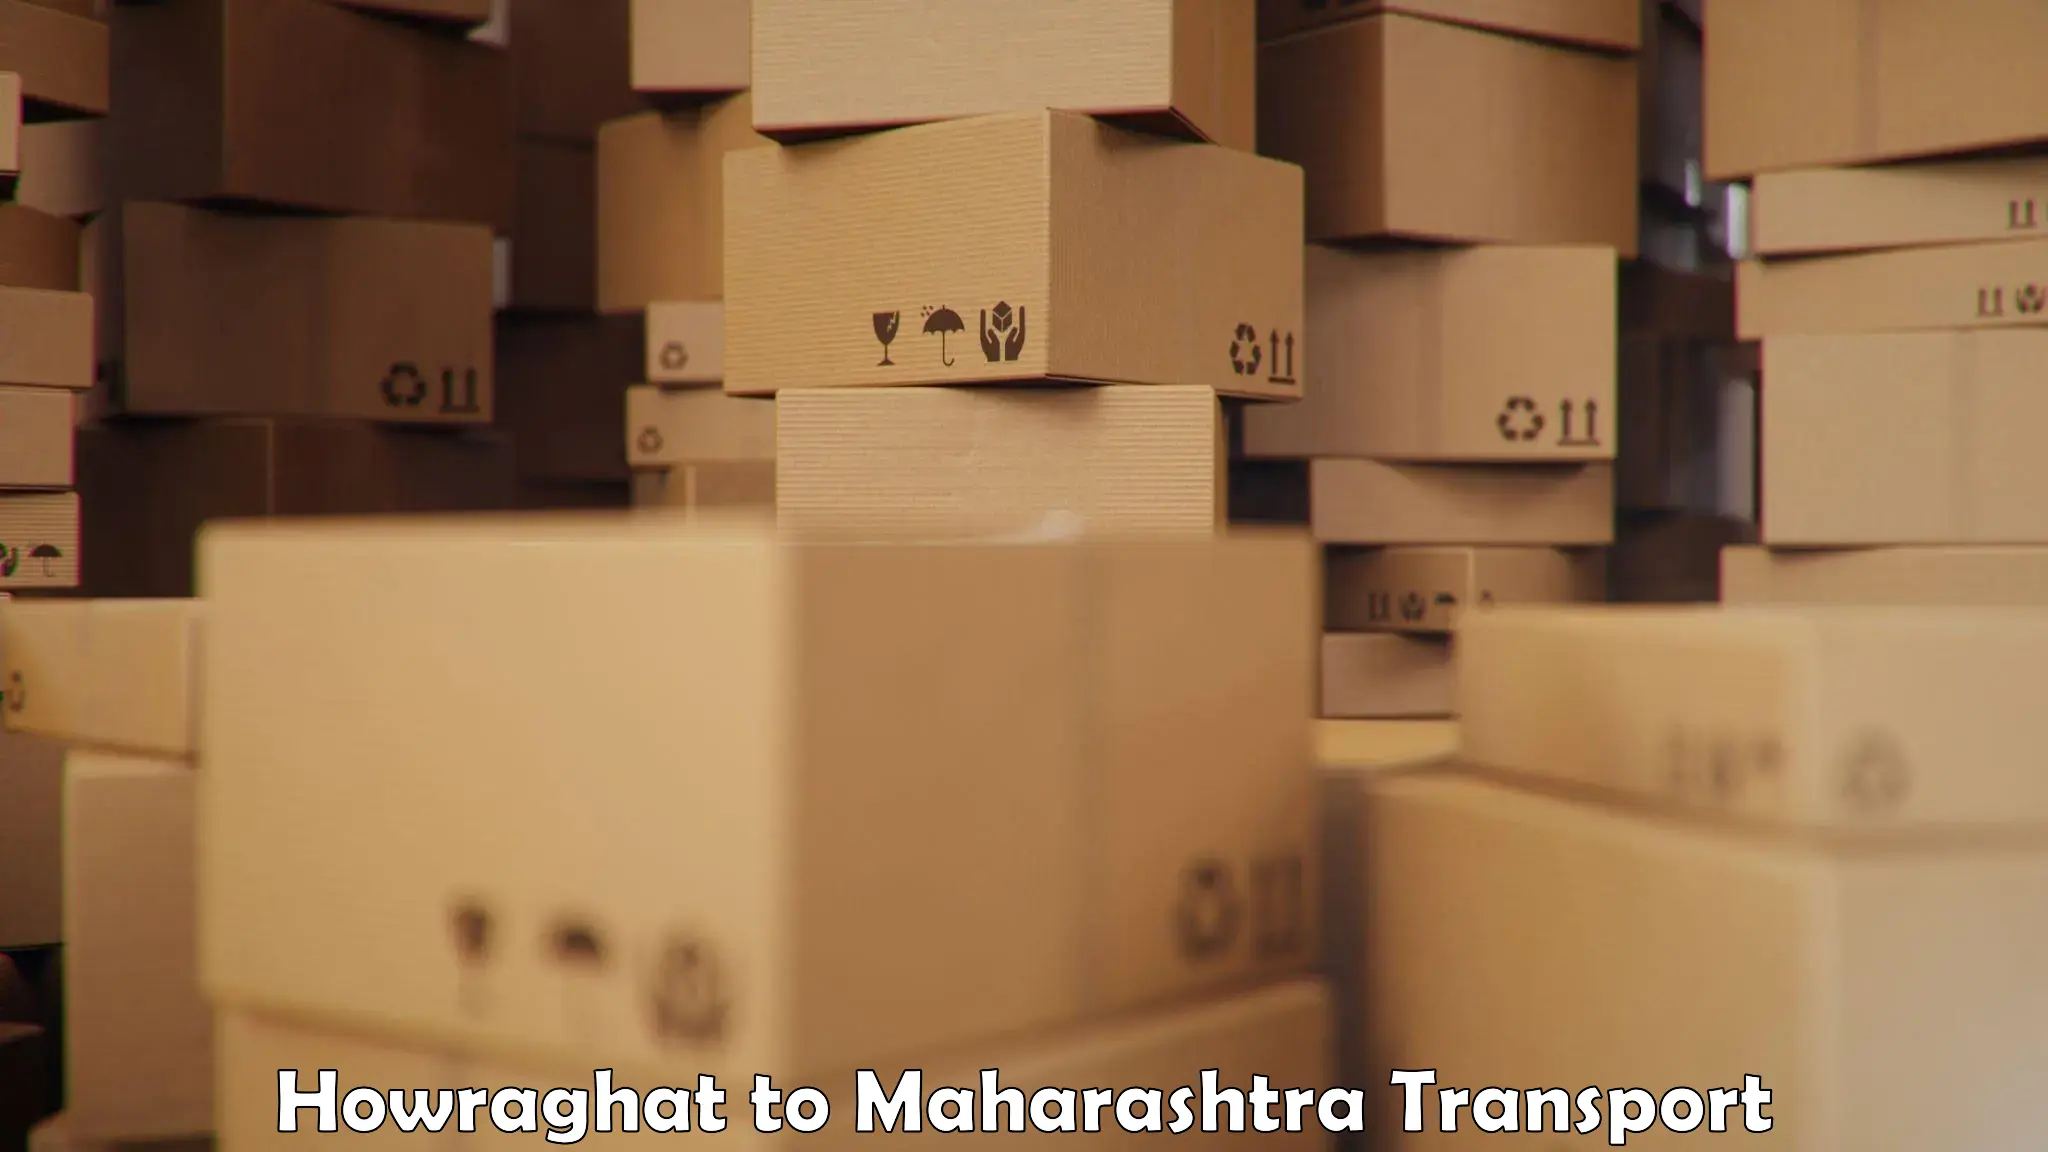 India truck logistics services Howraghat to Chandrapur